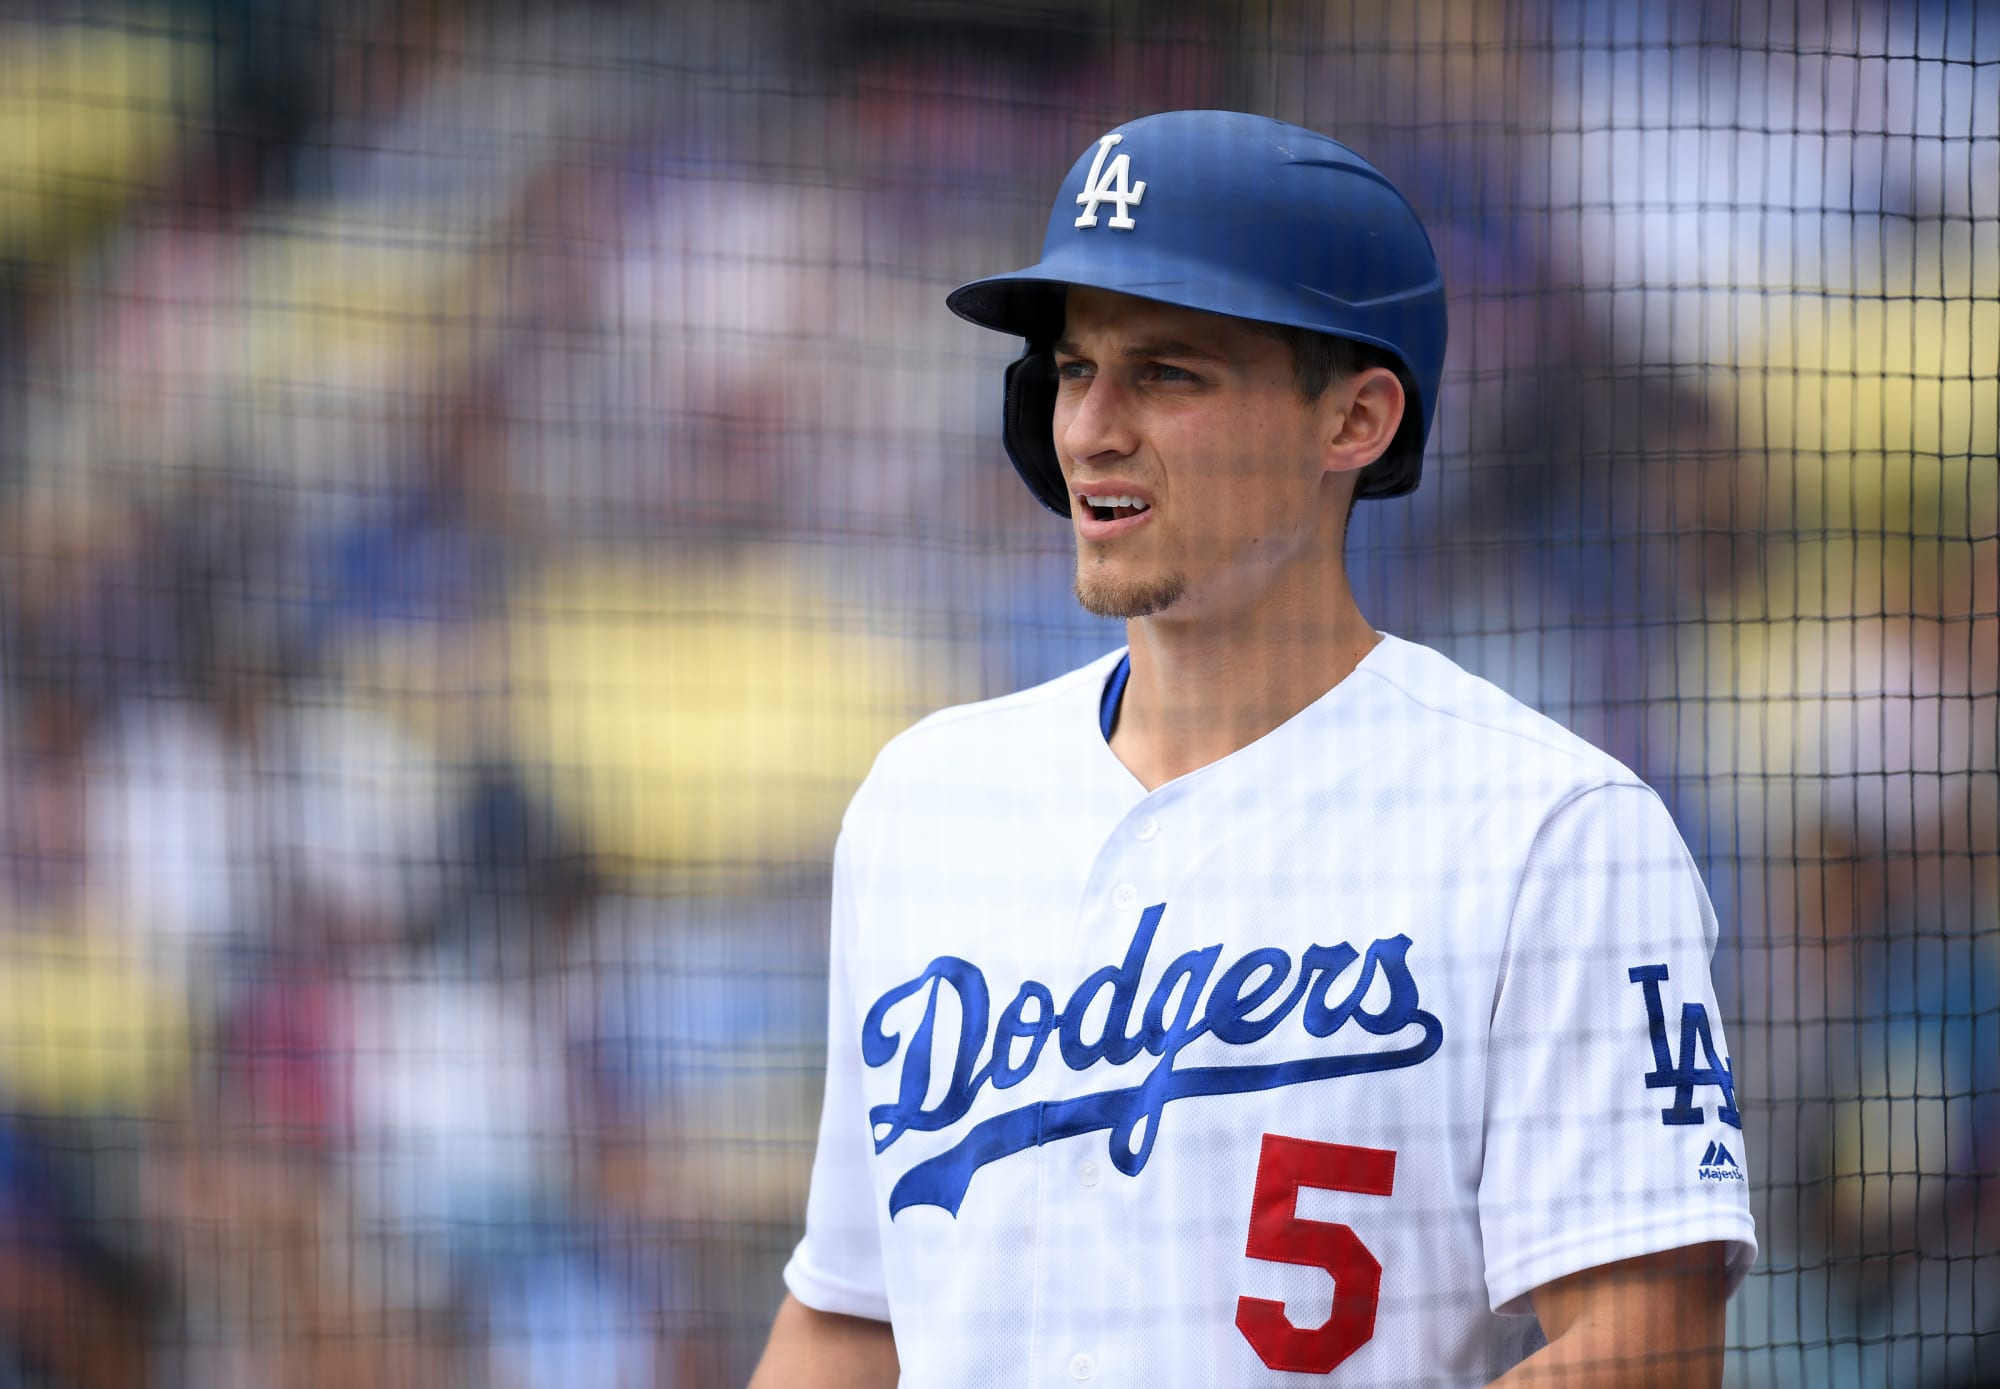 2021 Dodgers reunion with Corey Seager and Tío Albert